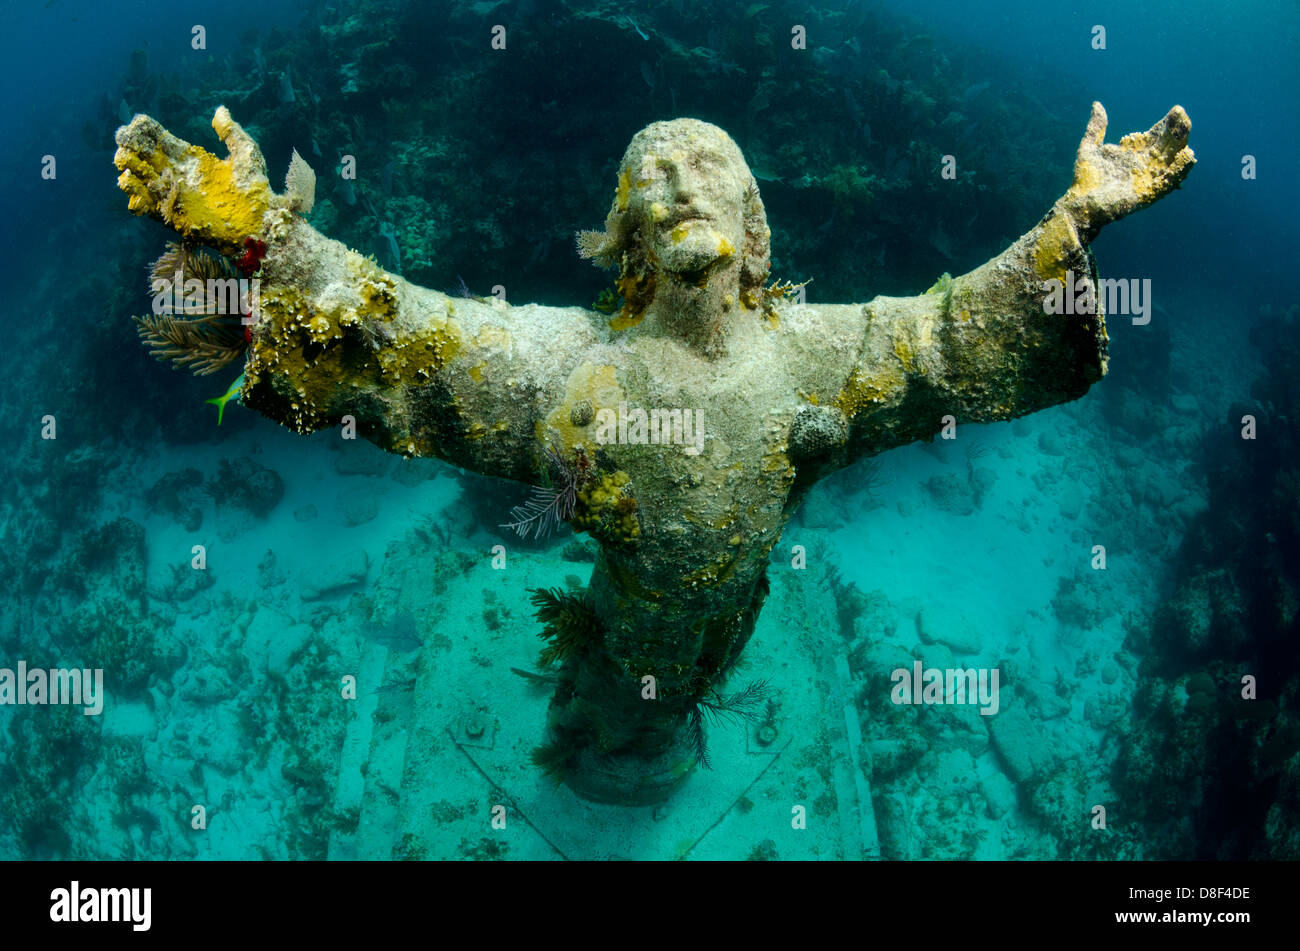 The iconic Christ of the Abyss statue in Key Largo, Florida Stock Photo